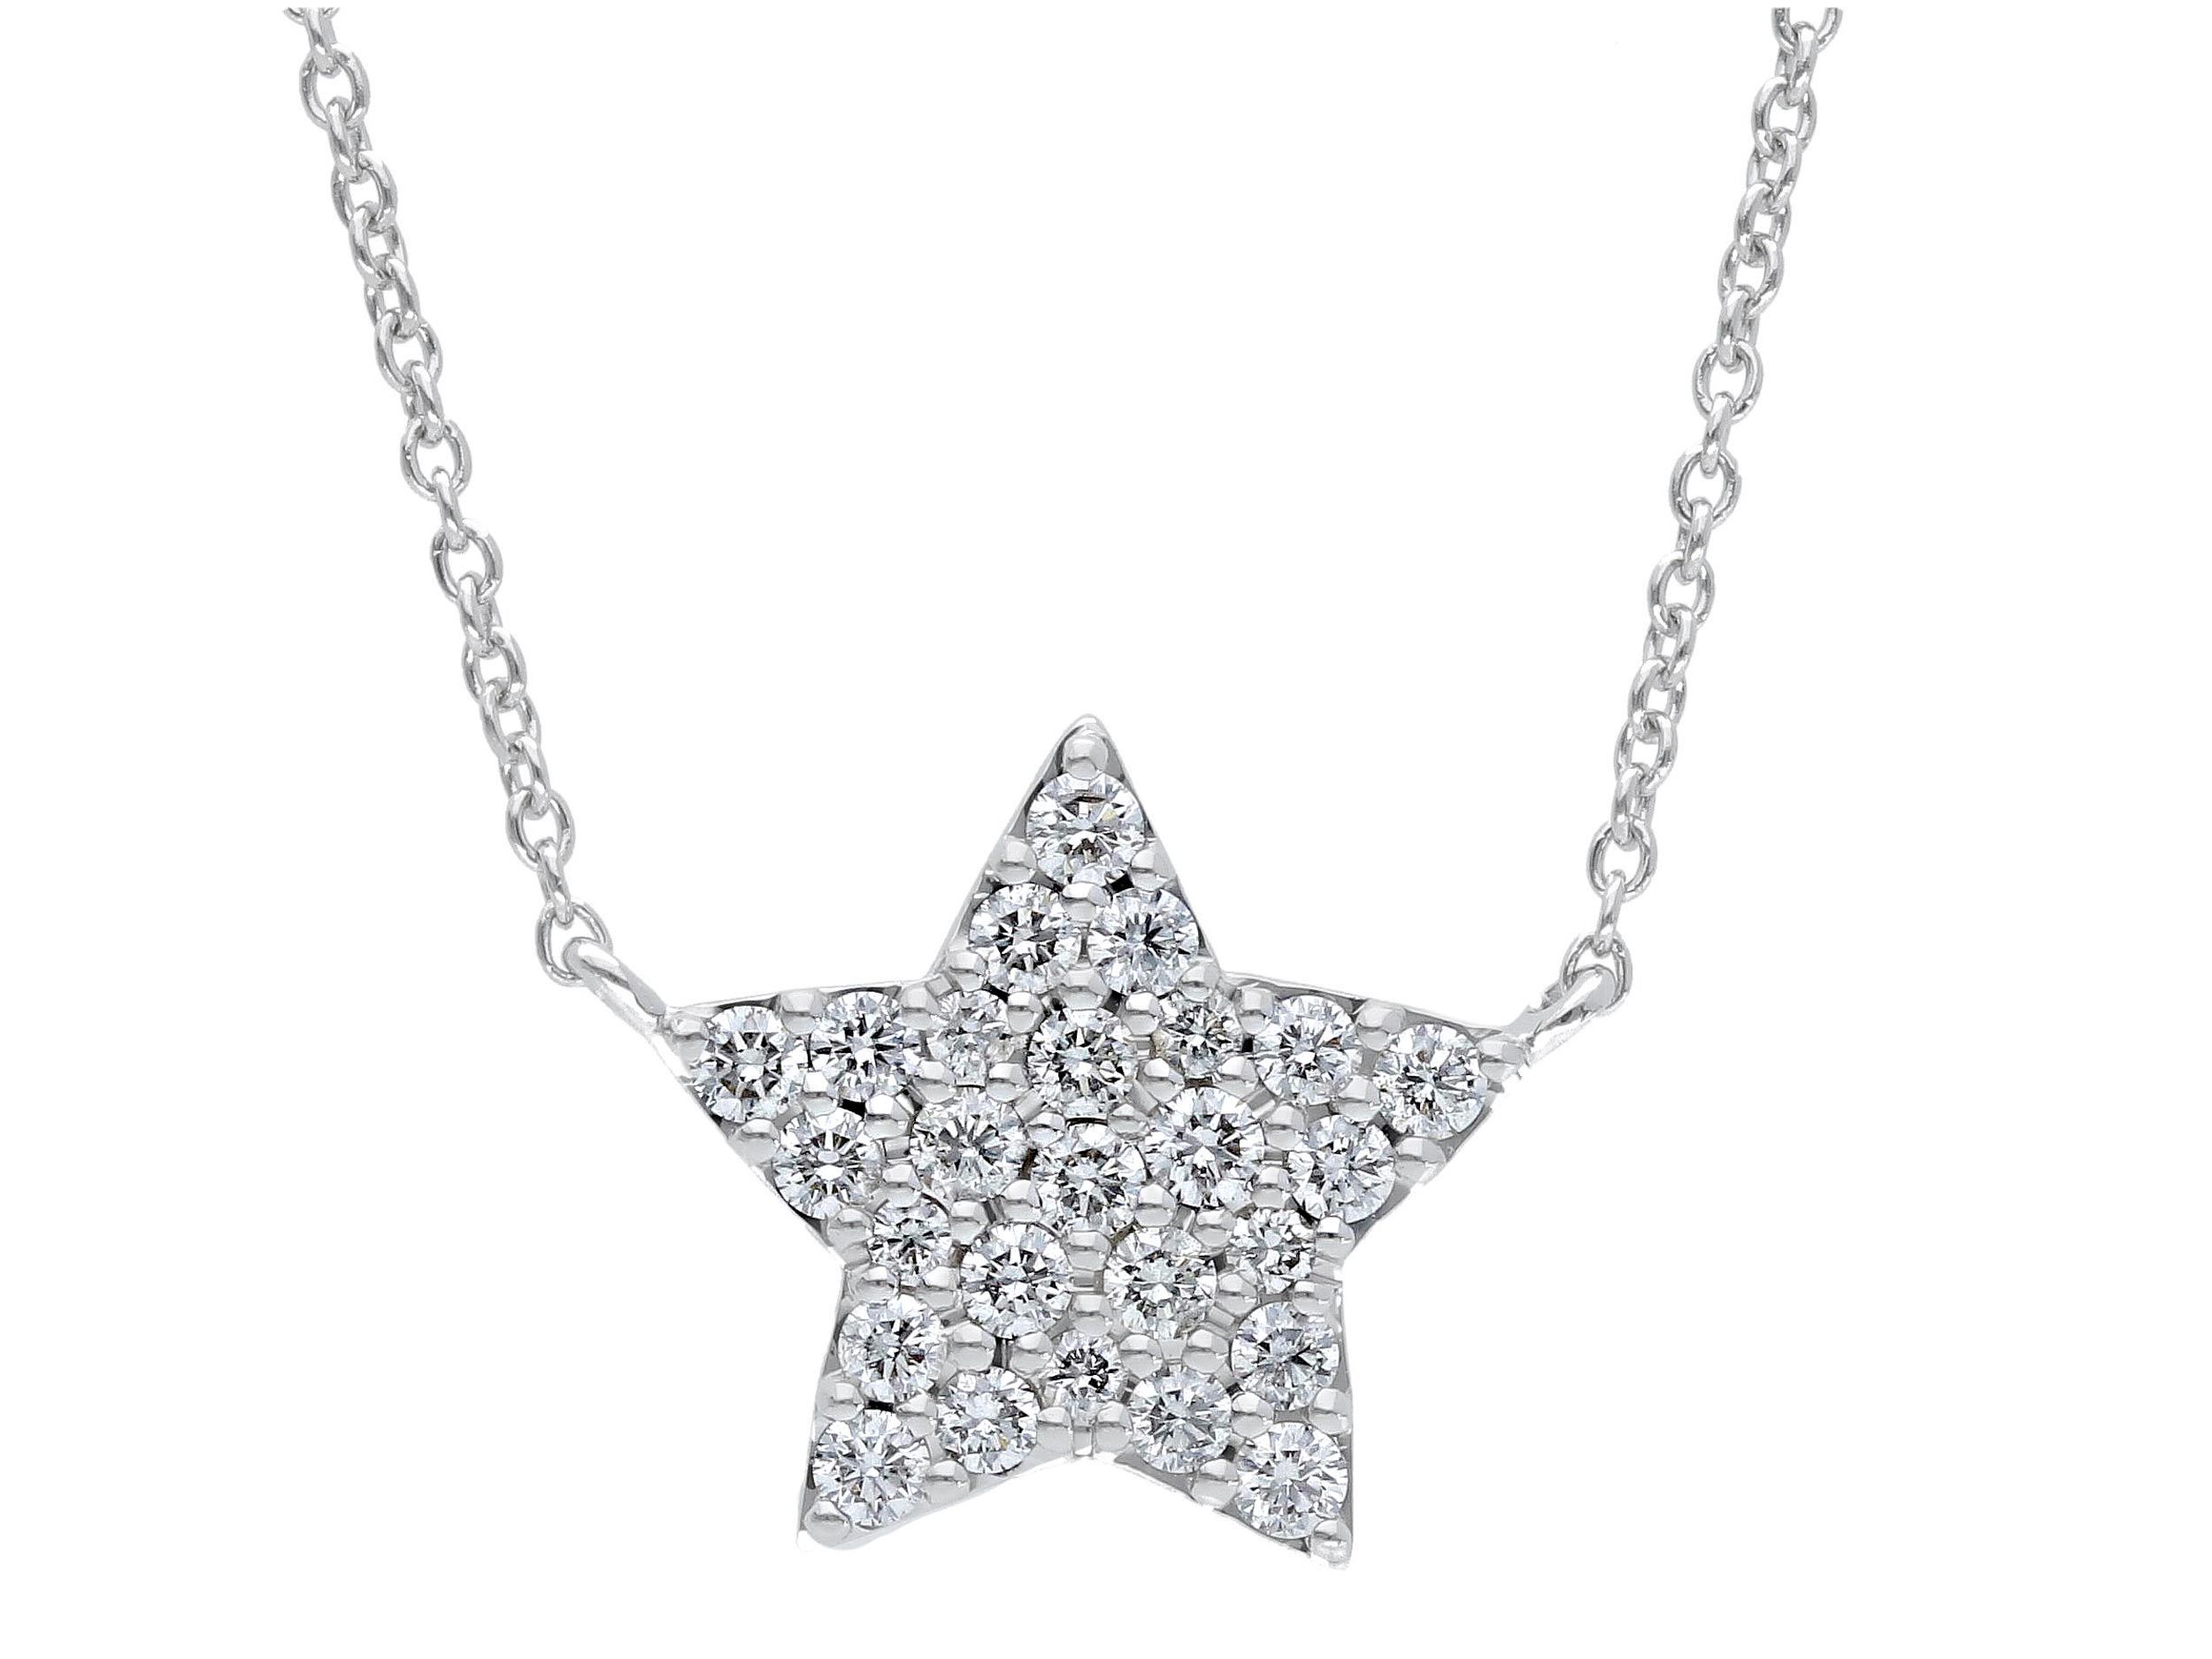  White gold necklace k18 with diamonds (code S253122)